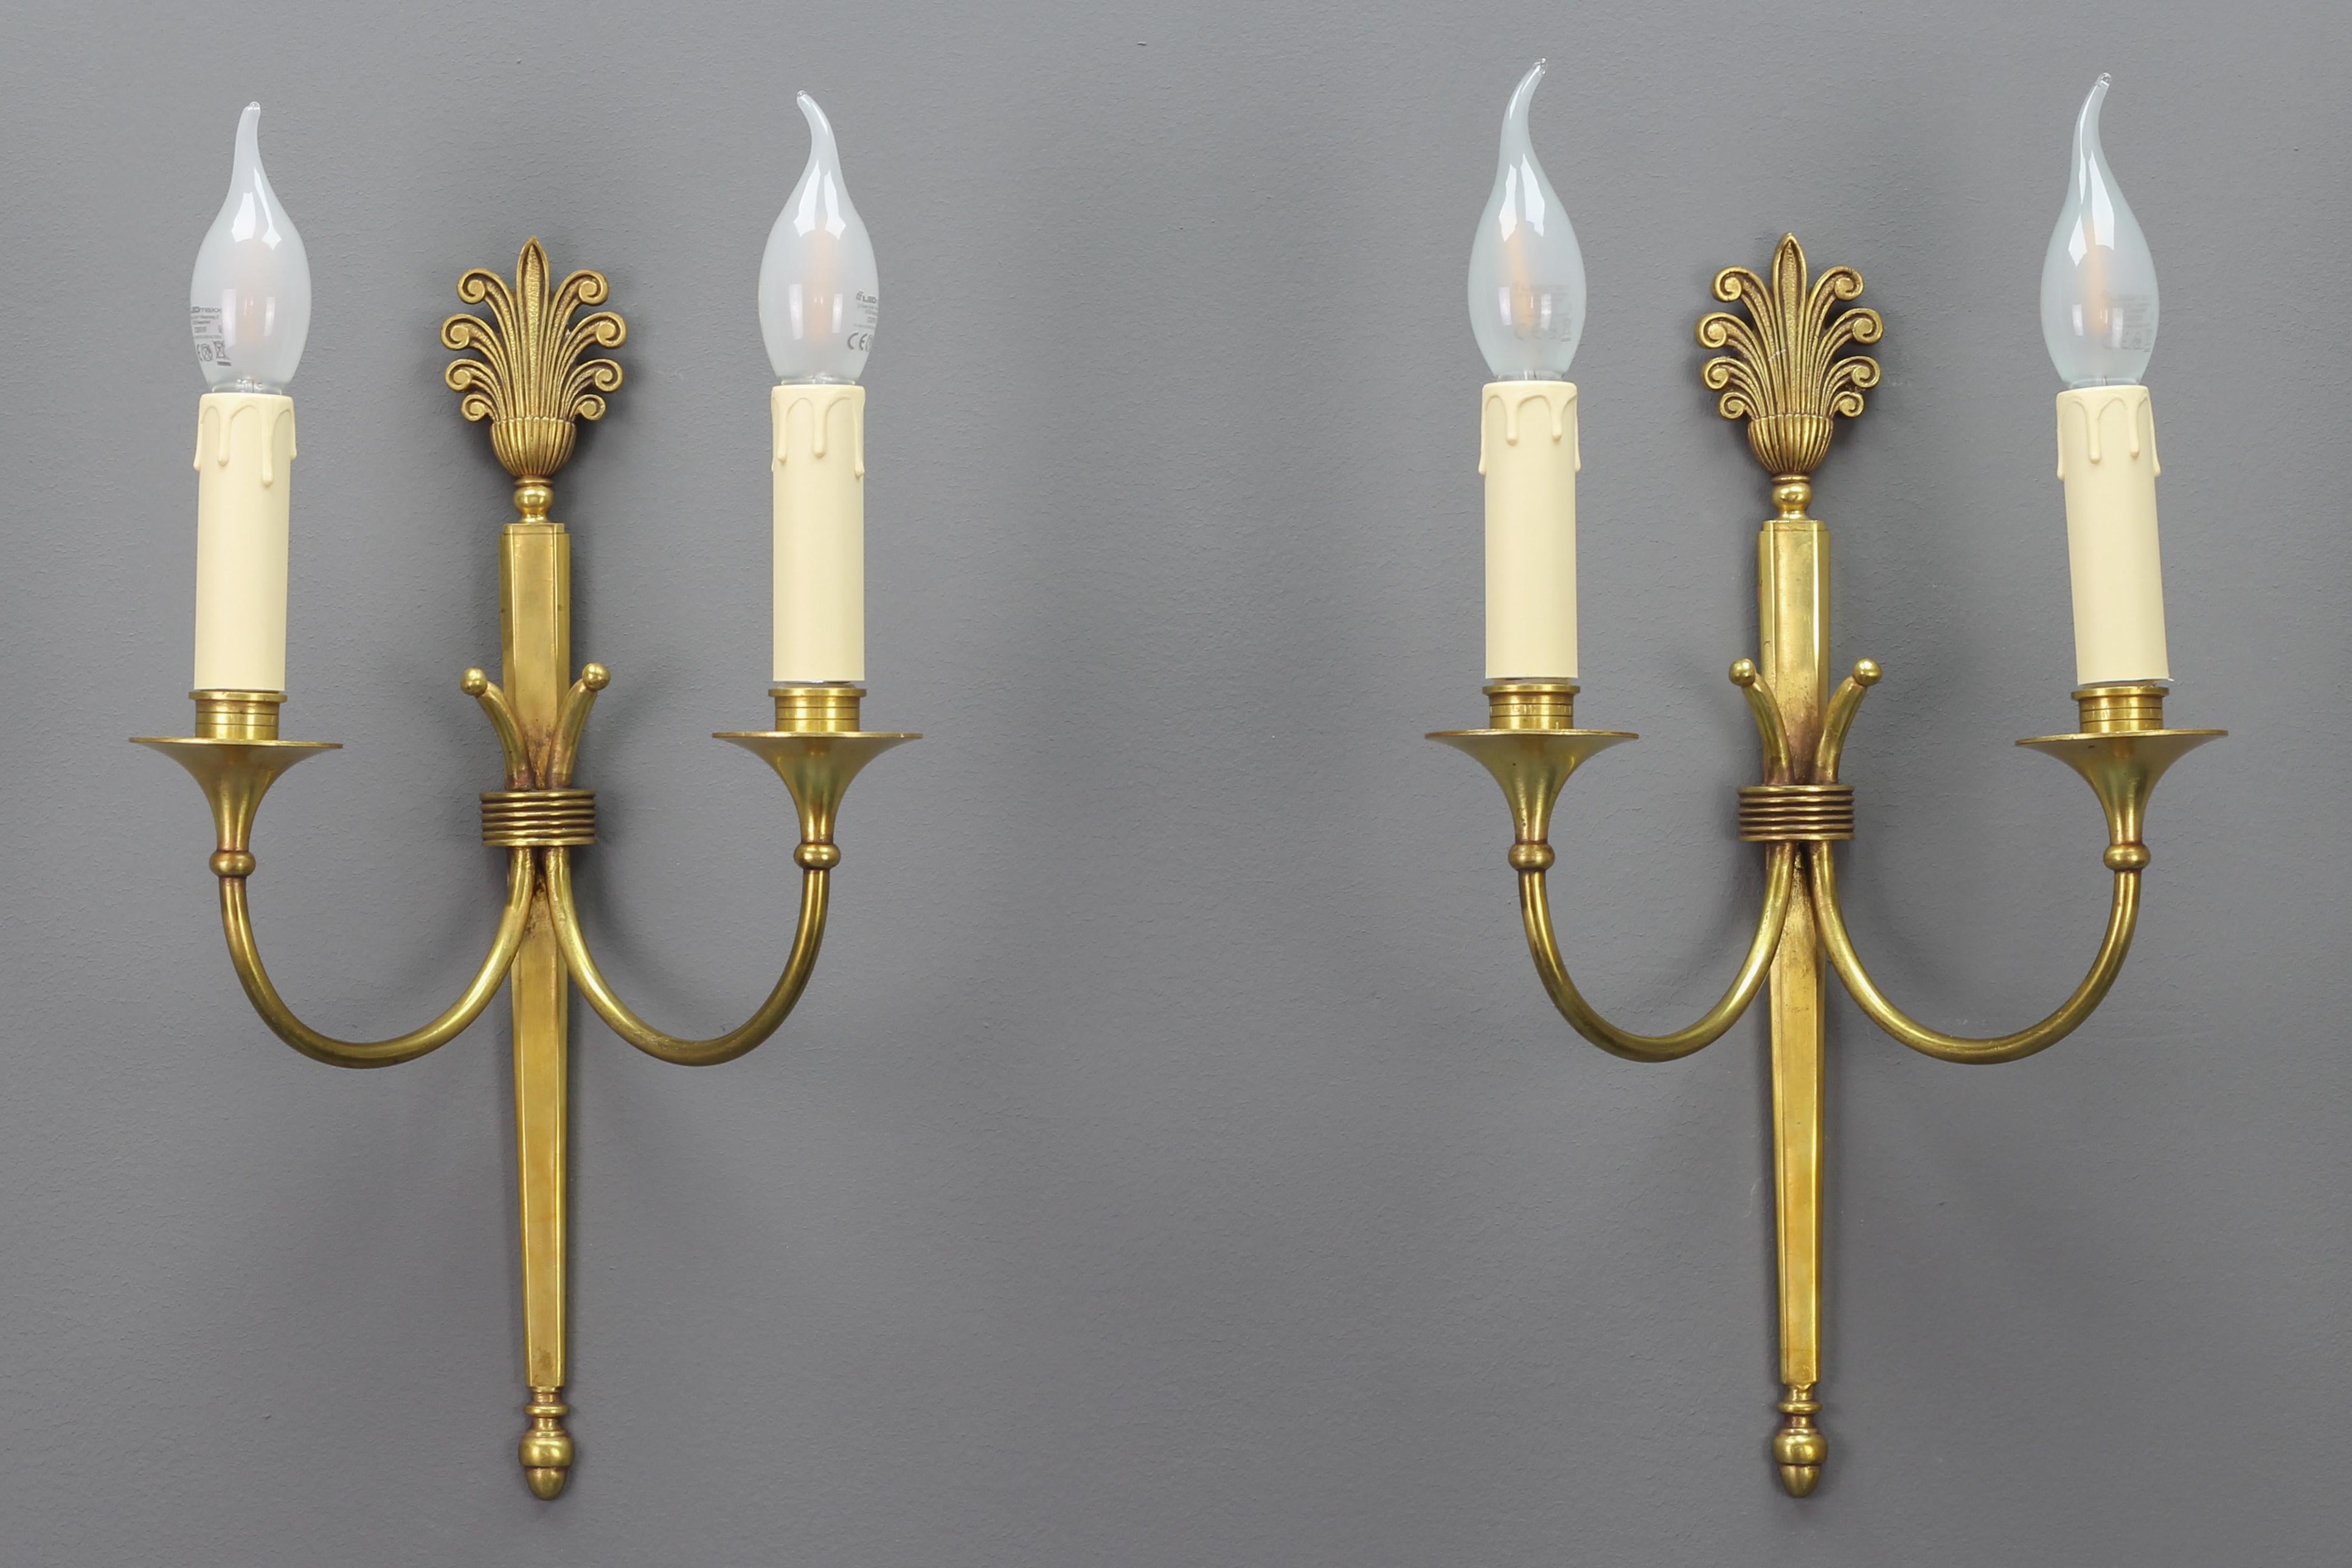 Pair of French Art Deco brass twin arm sconces from ca. 1930.
This elegant pair of brass sconces has a beautiful brass base with typical Art Deco-style decors. Each sconce has two arms each with a socket for E14 size light bulb. Numbered at the